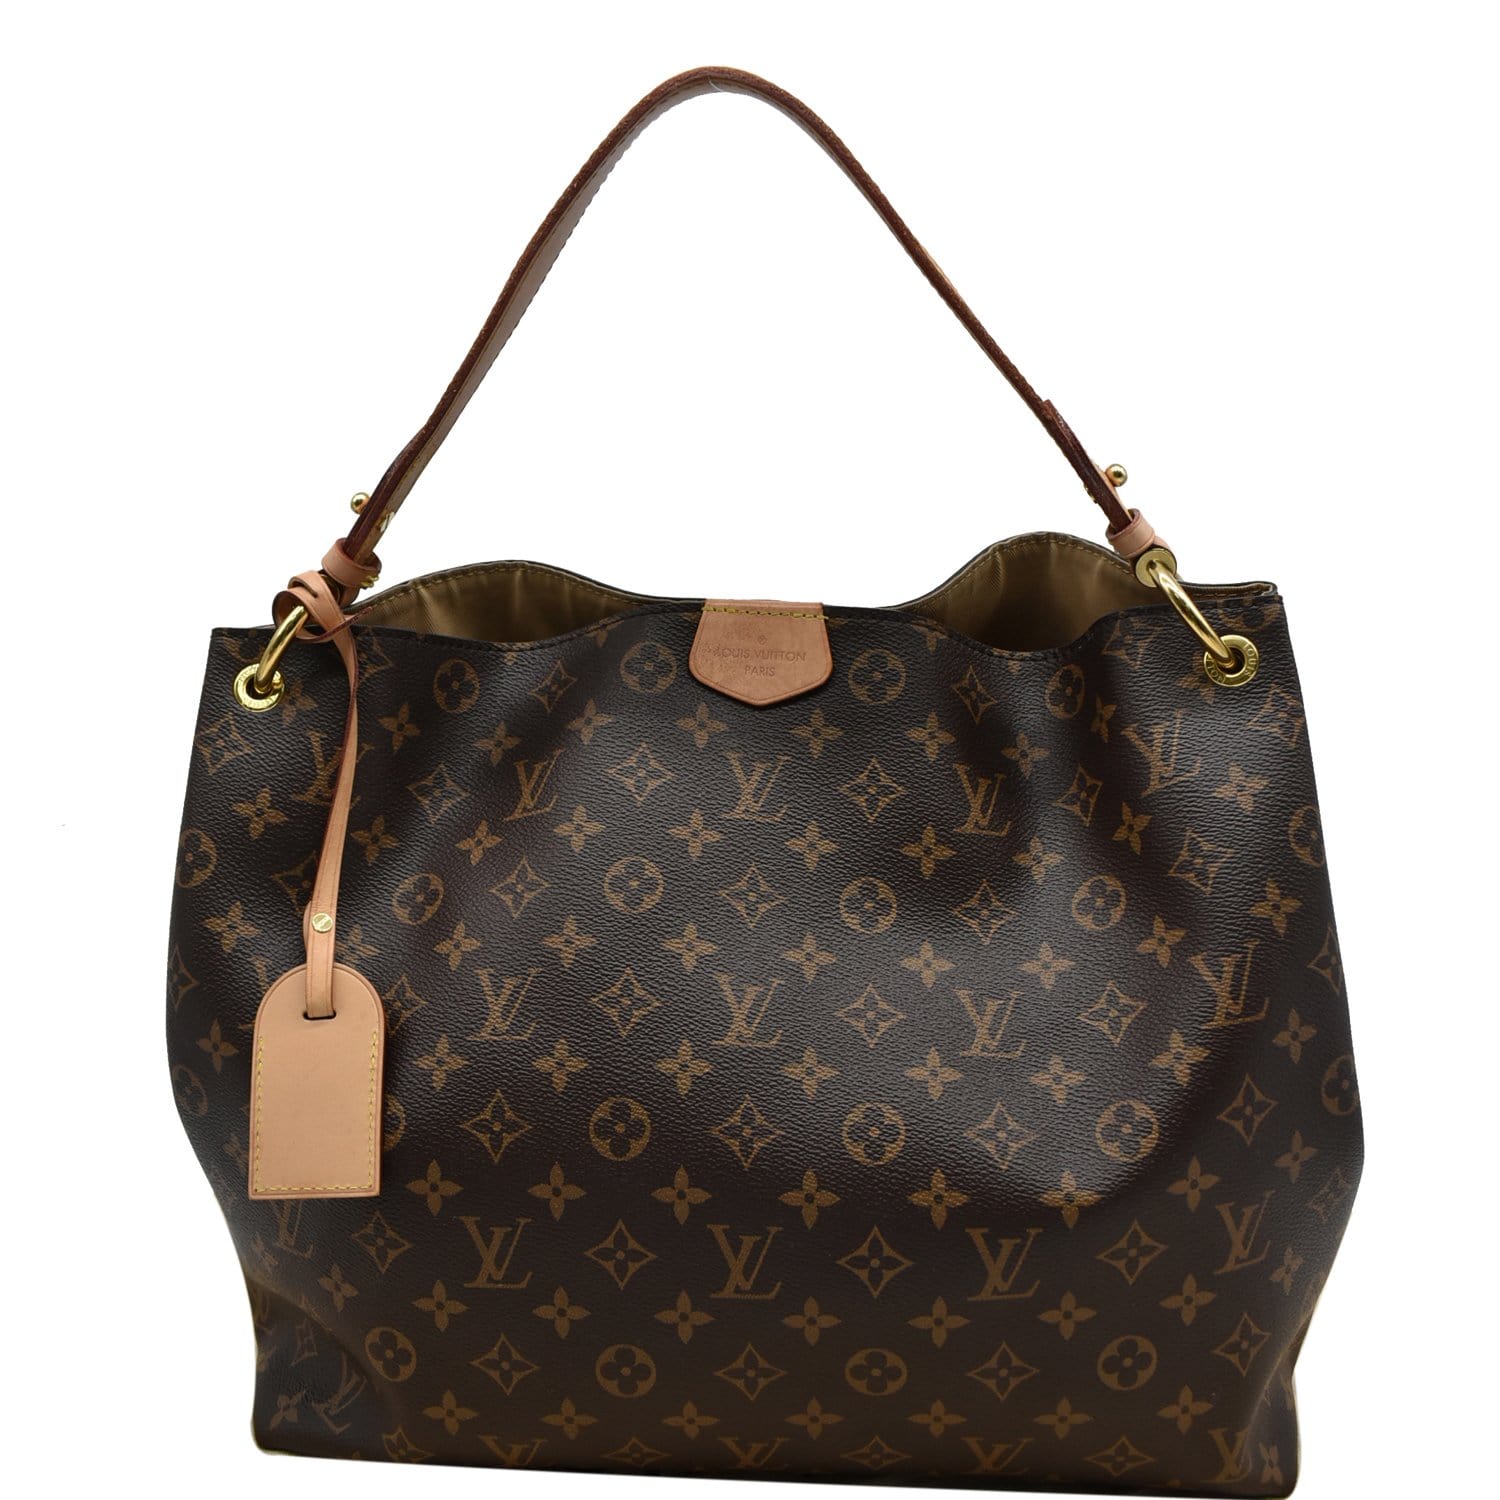 The Louis Vuitton Graceful bag is a bag that is perfect for daily